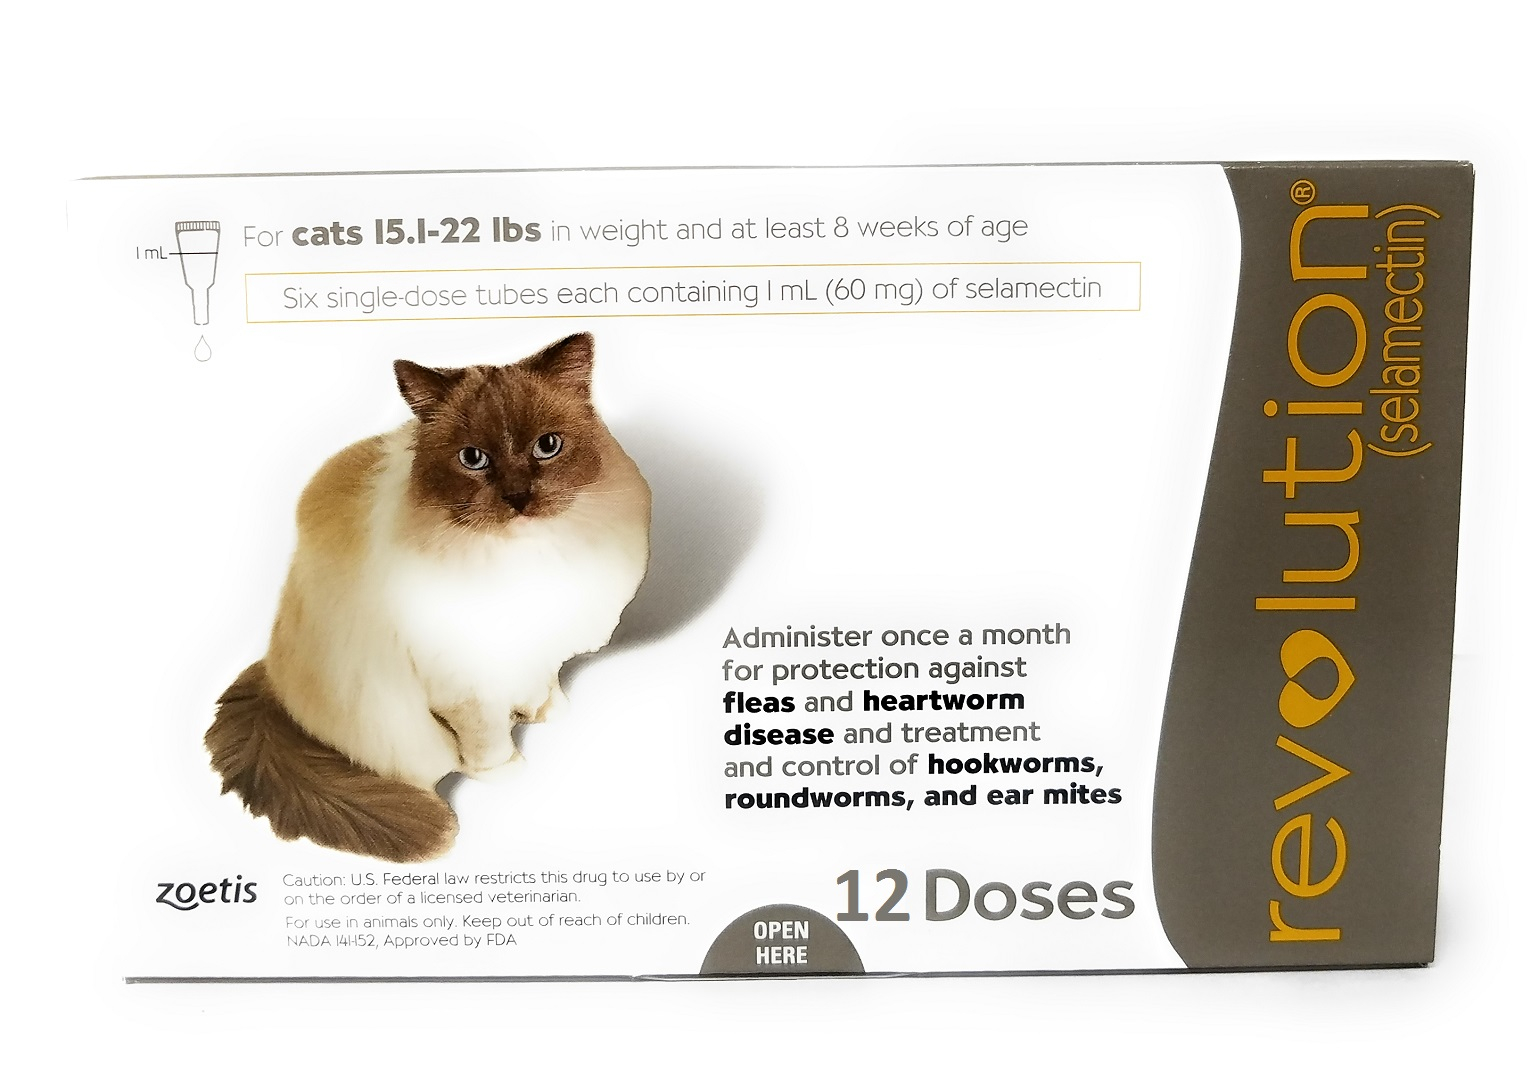 Vet Approved Rx Revolution For Cats 1522 lbs 12 Doses